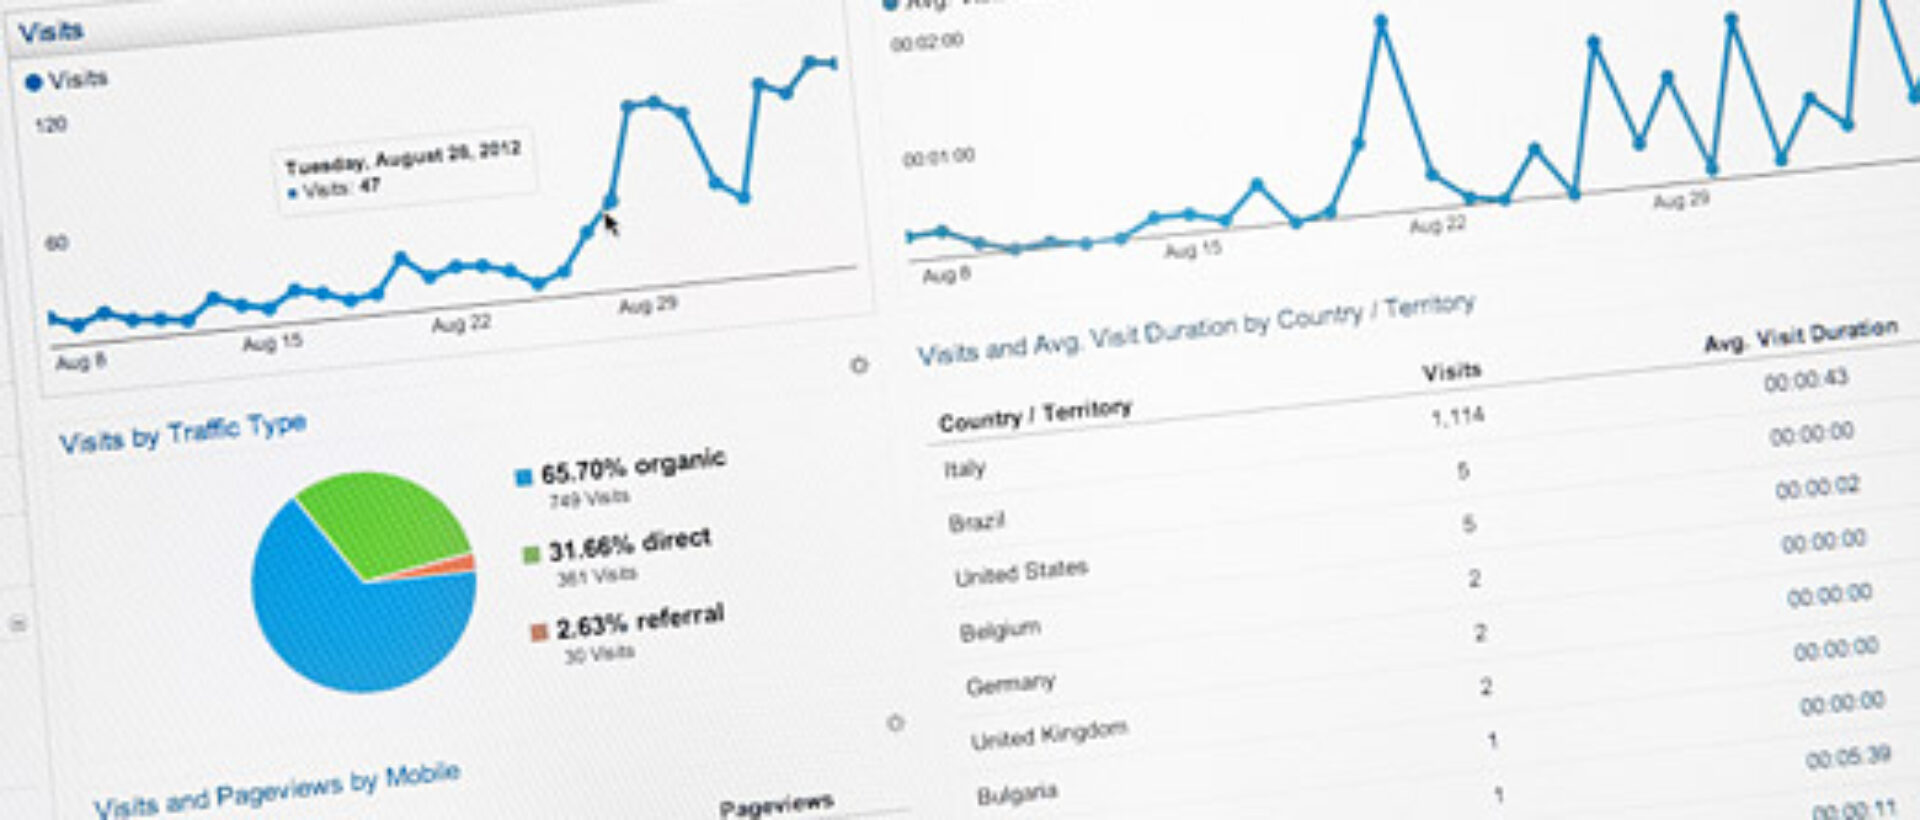 More About Seo With Google Analytics